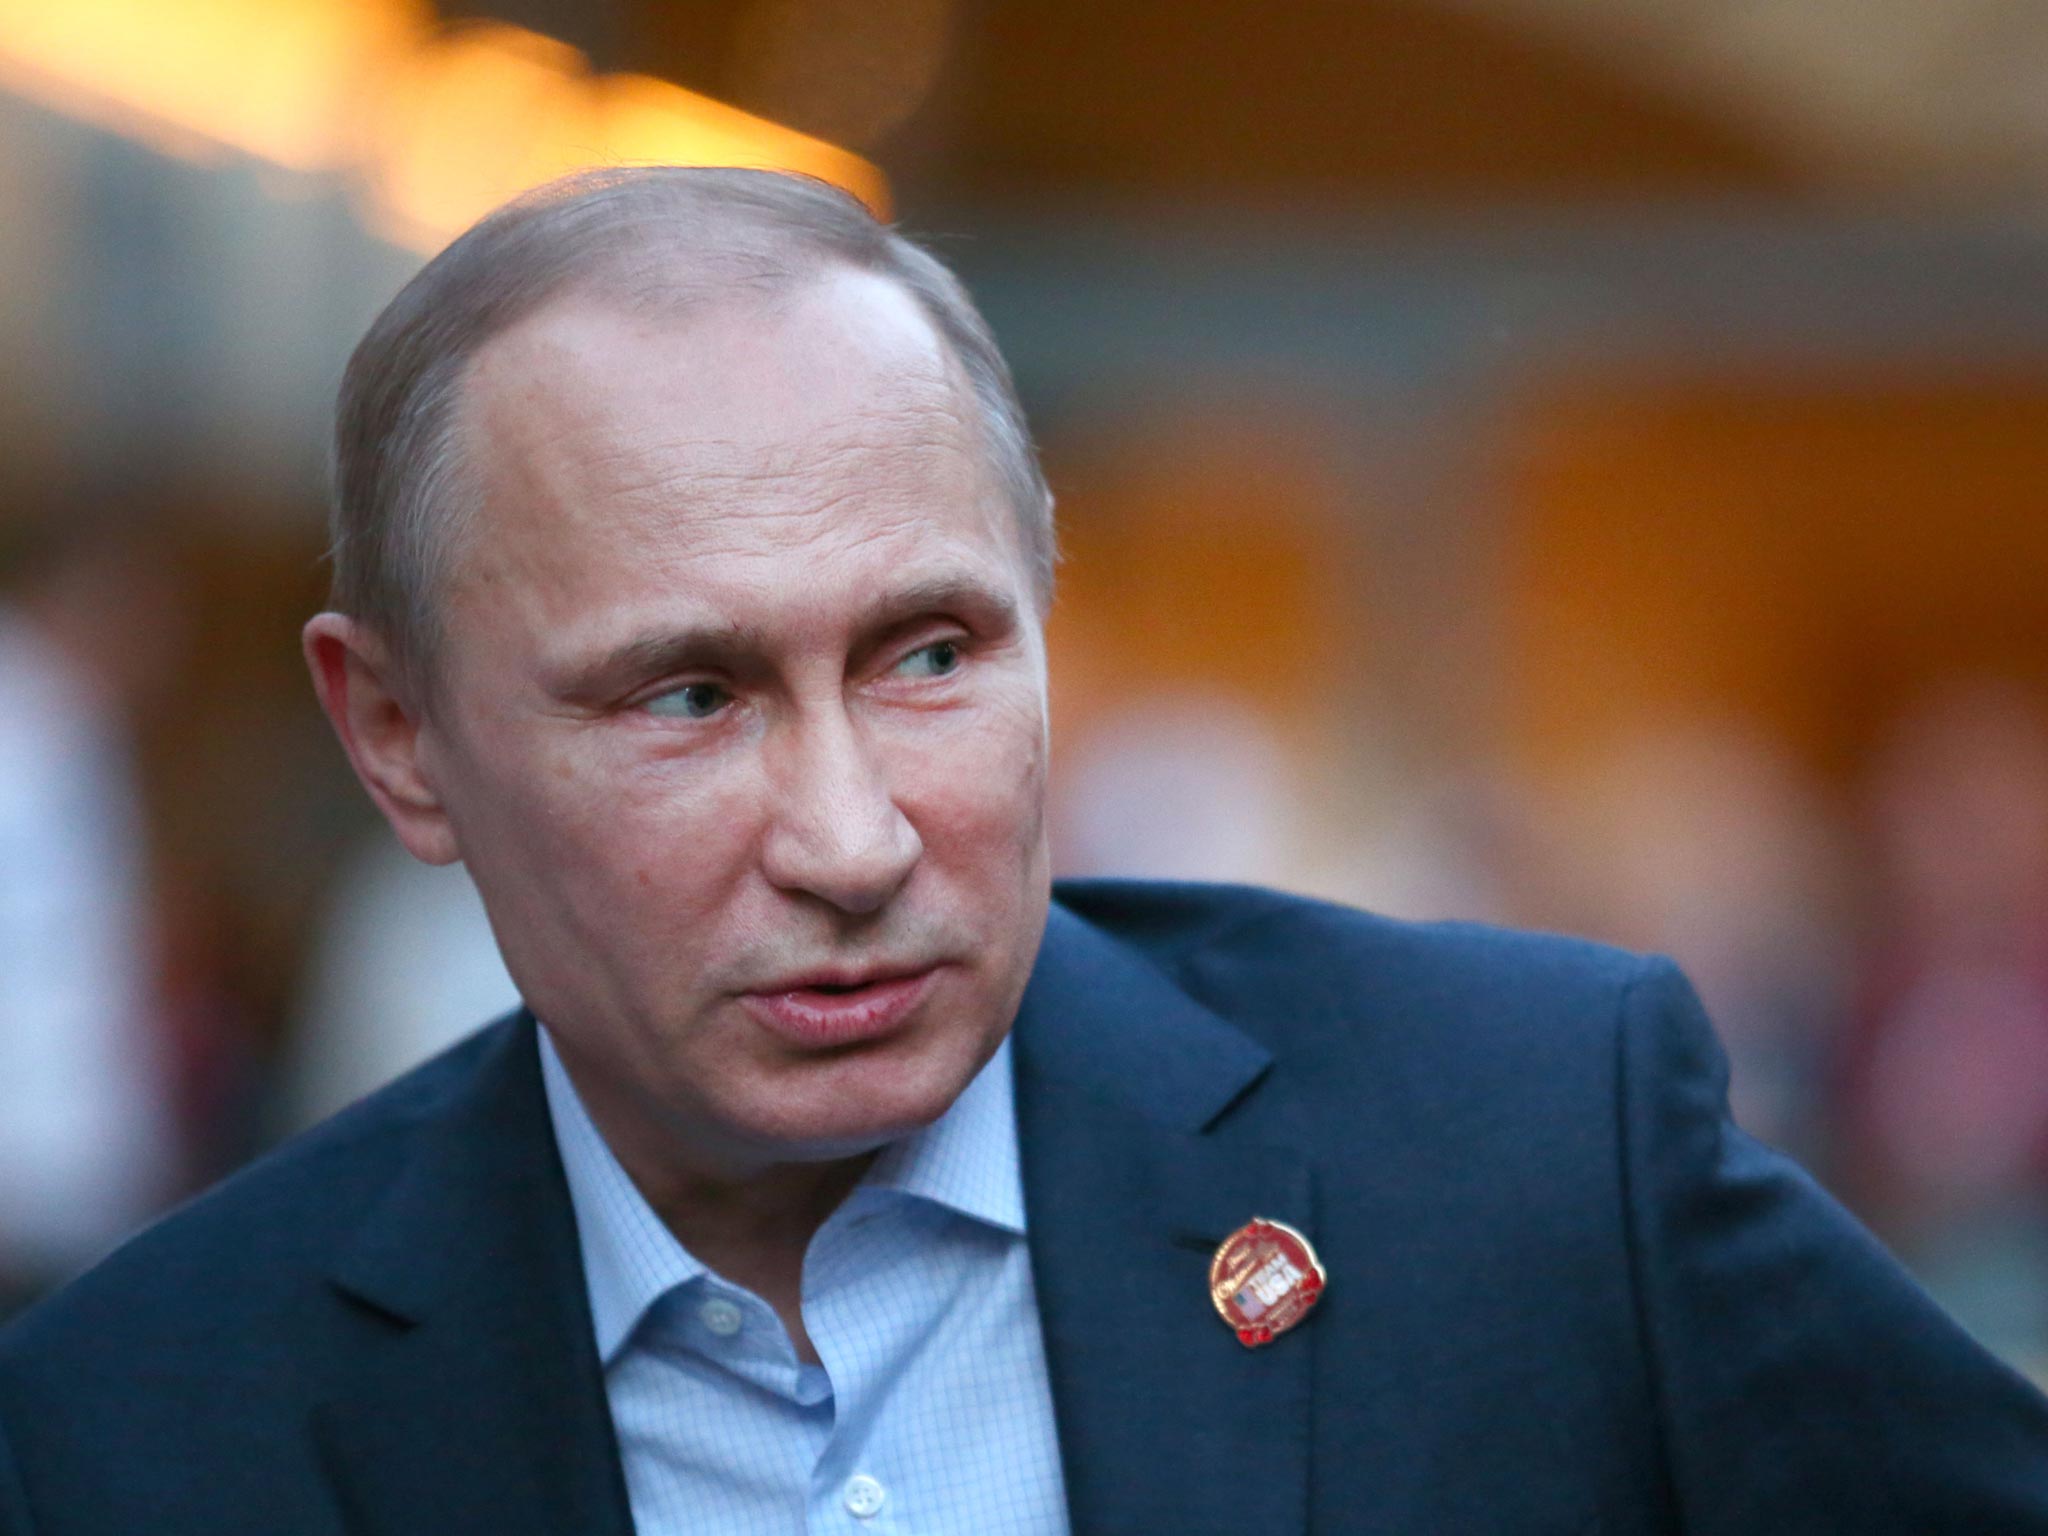 Putin now seems to be on the verge of plunging the region if not into World War Three